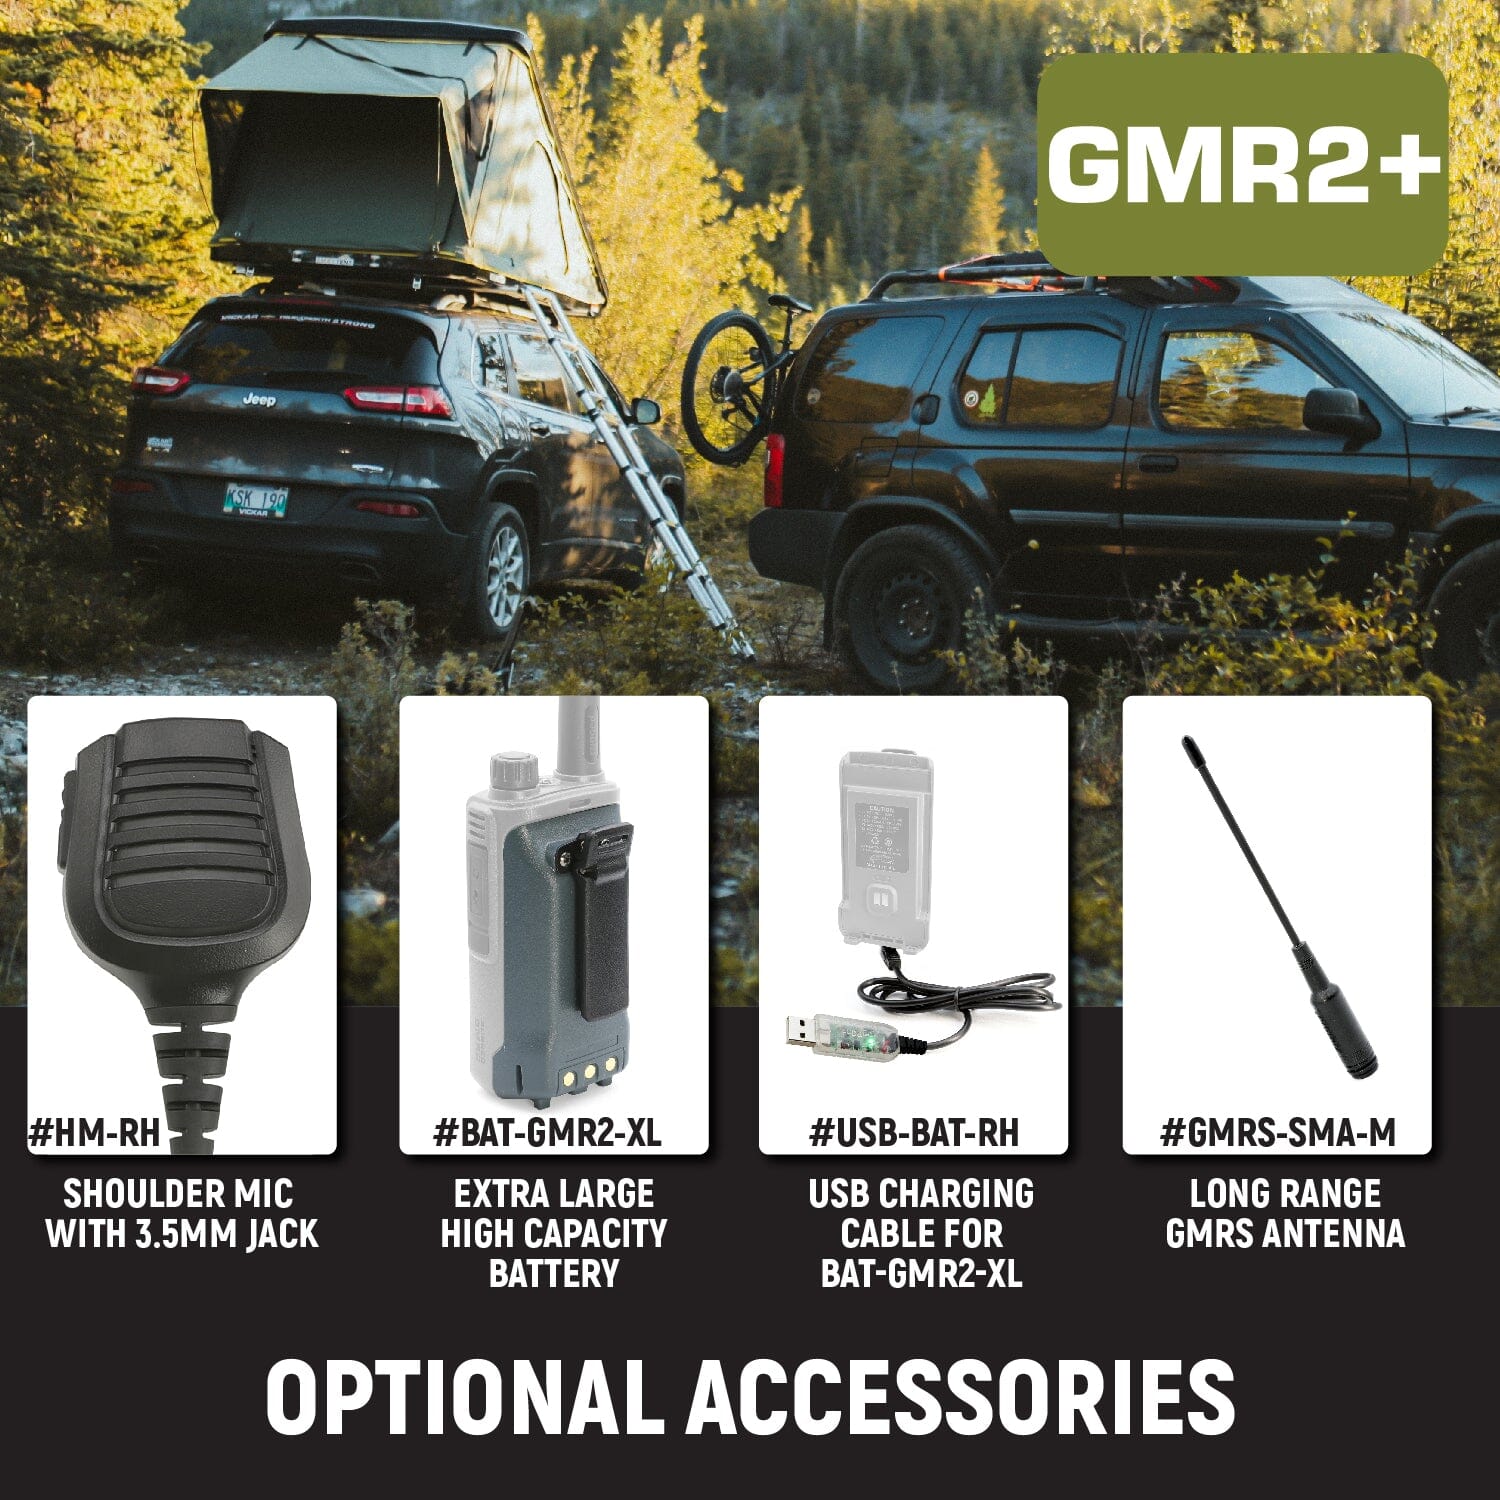 2 PACK - Rugged GMR2 PLUS GMRS and FRS Two Way Handheld Radios - High Visibility Safety Yellow